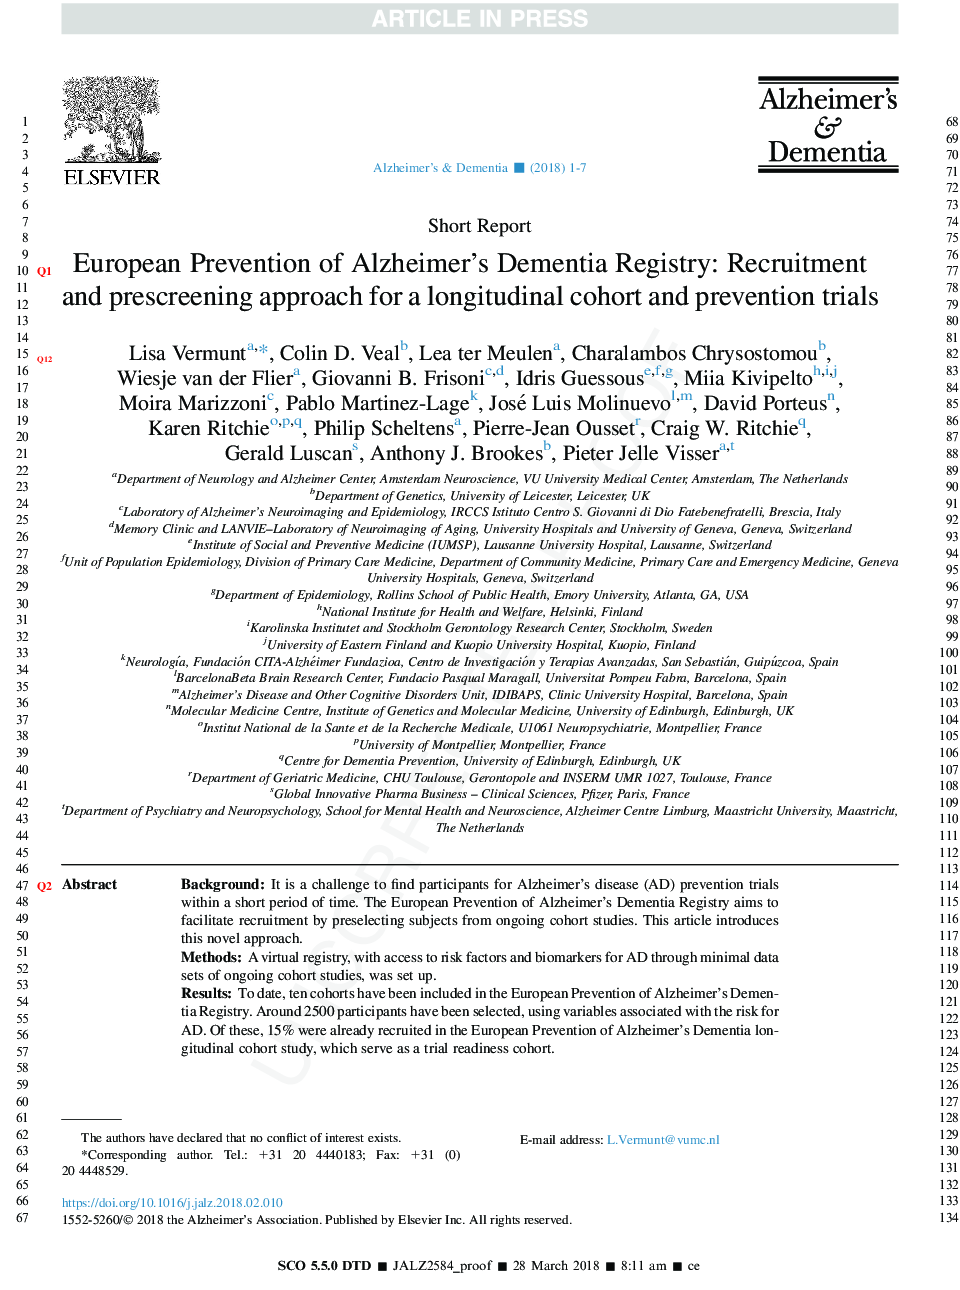 European Prevention of Alzheimer's Dementia Registry: Recruitment and prescreening approach for a longitudinal cohort and prevention trials